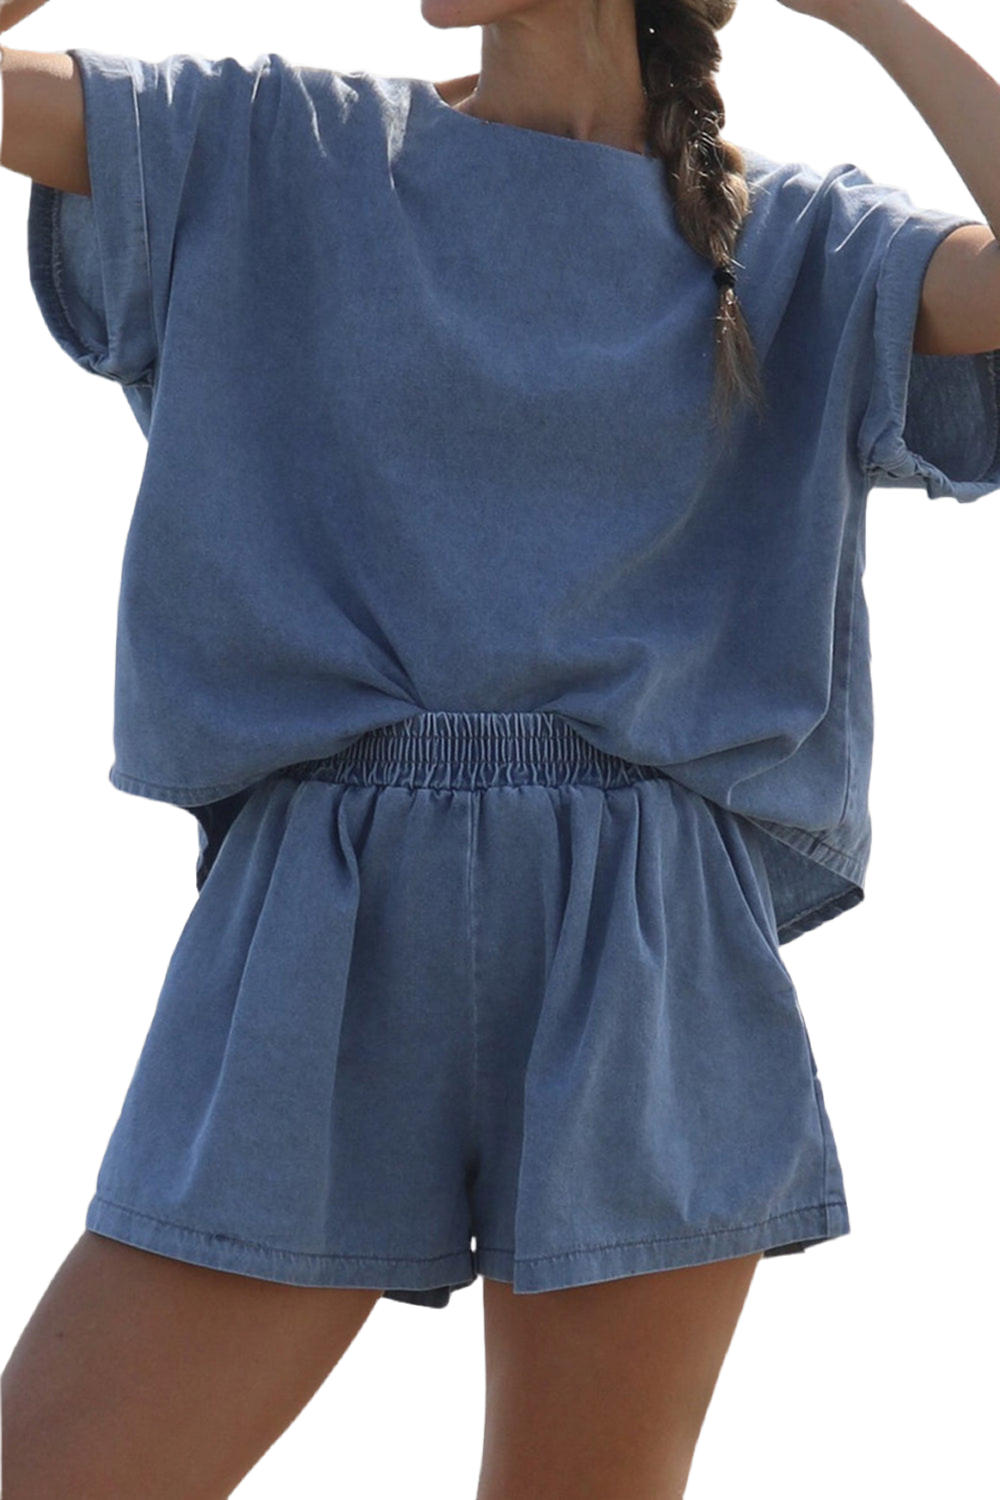 Peace and Love Top and Shorts Denim Set